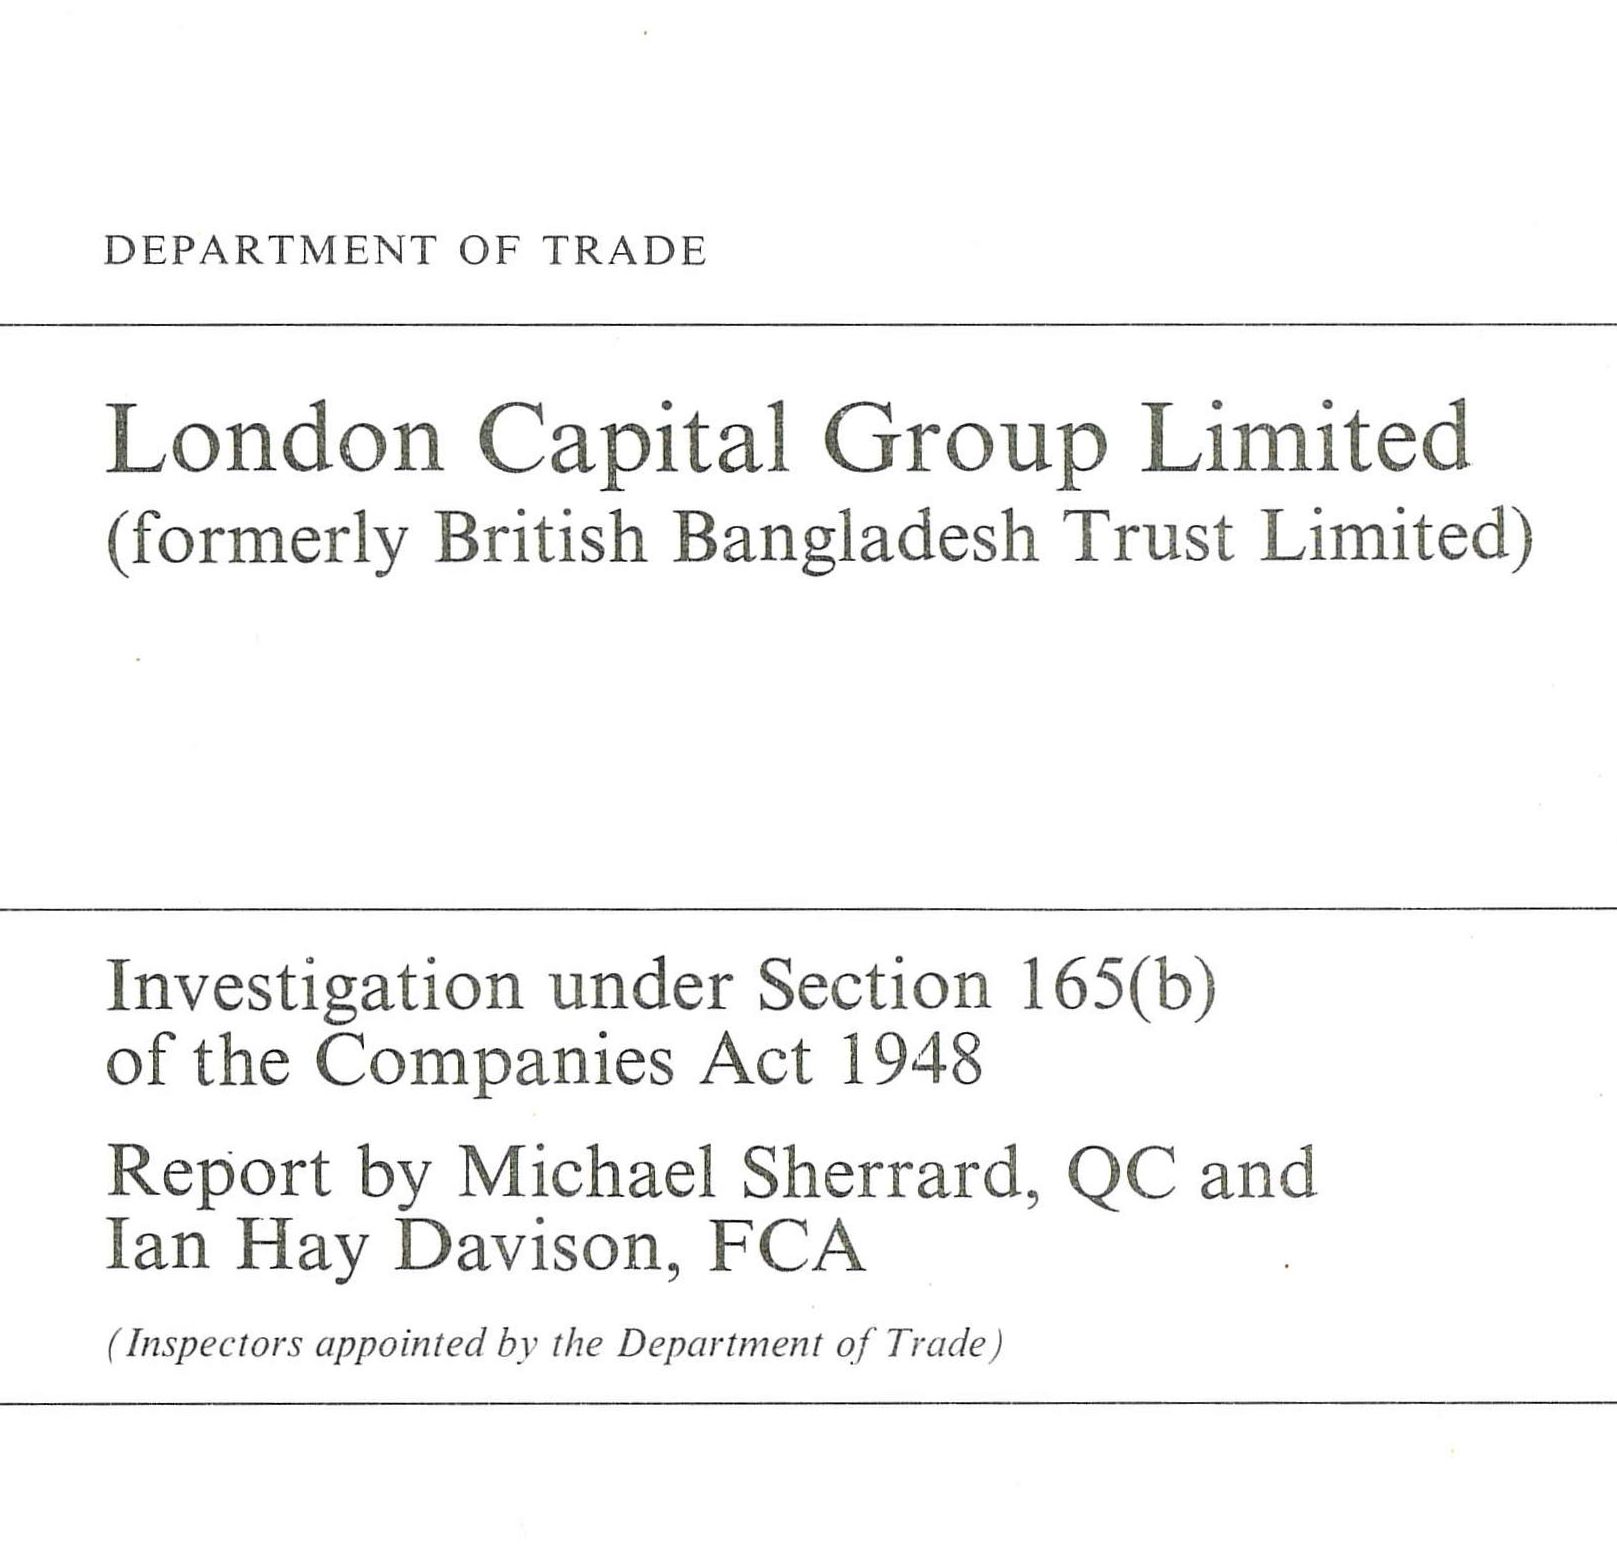 London Capital Group Limited (formerly British Bangladesh Trust Limited): Investigation under Section 165(b) of the Companies Act 1948 - Report by Michael Sherrard, QC and Ian Hay Davison, FCA, Department of Trade, Her Majesty’s Stationary Office, 1977.